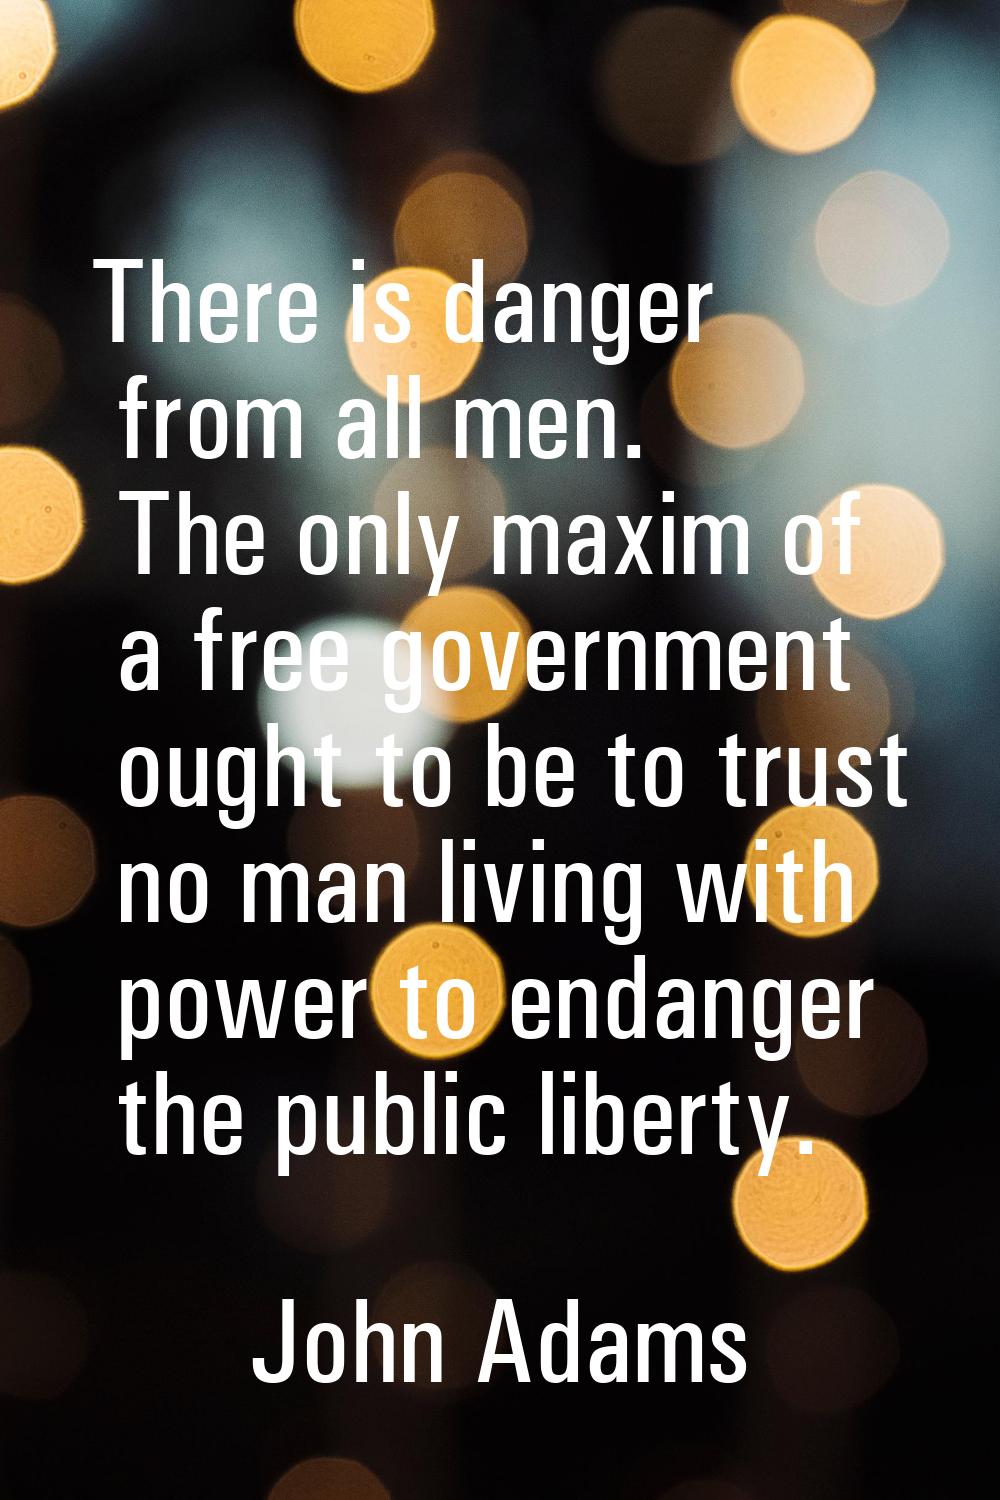 There is danger from all men. The only maxim of a free government ought to be to trust no man livin